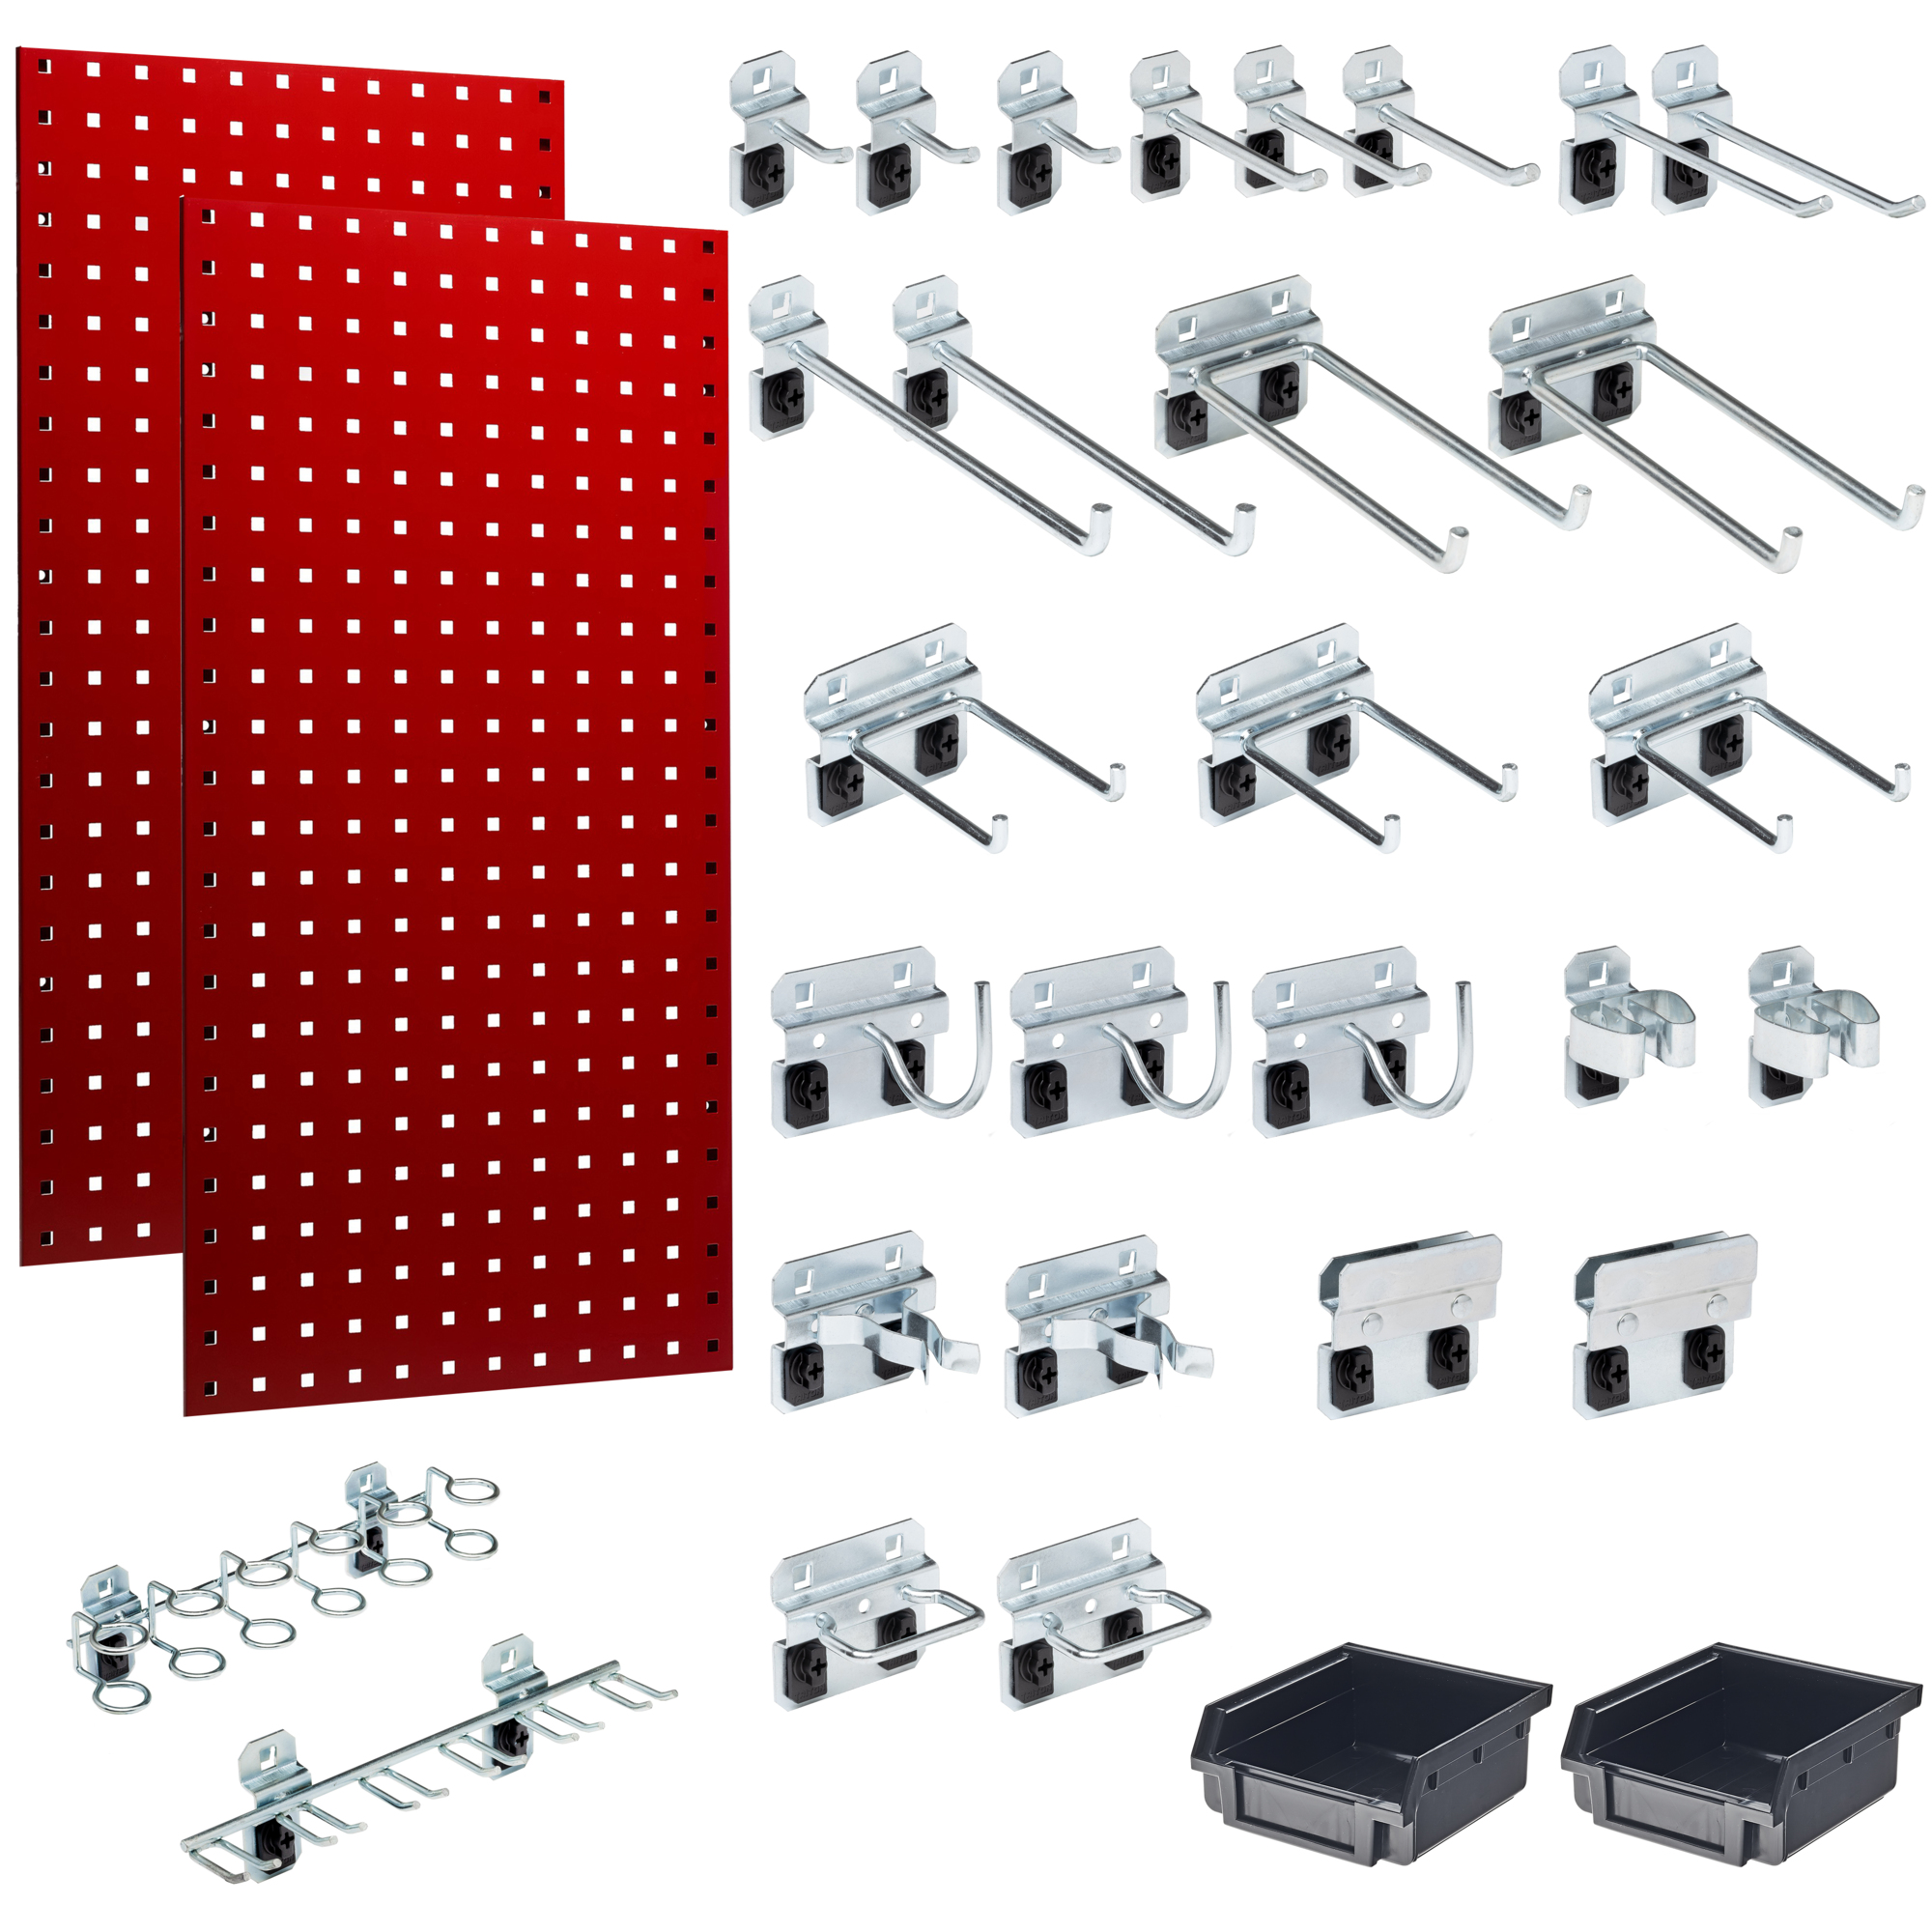 Triton Products, (2) Steel Pegboards with 30 Piece LocHook Assortment, Capacity 350 lb, Length 18 in, Width 36 in, Model LB18-RKit